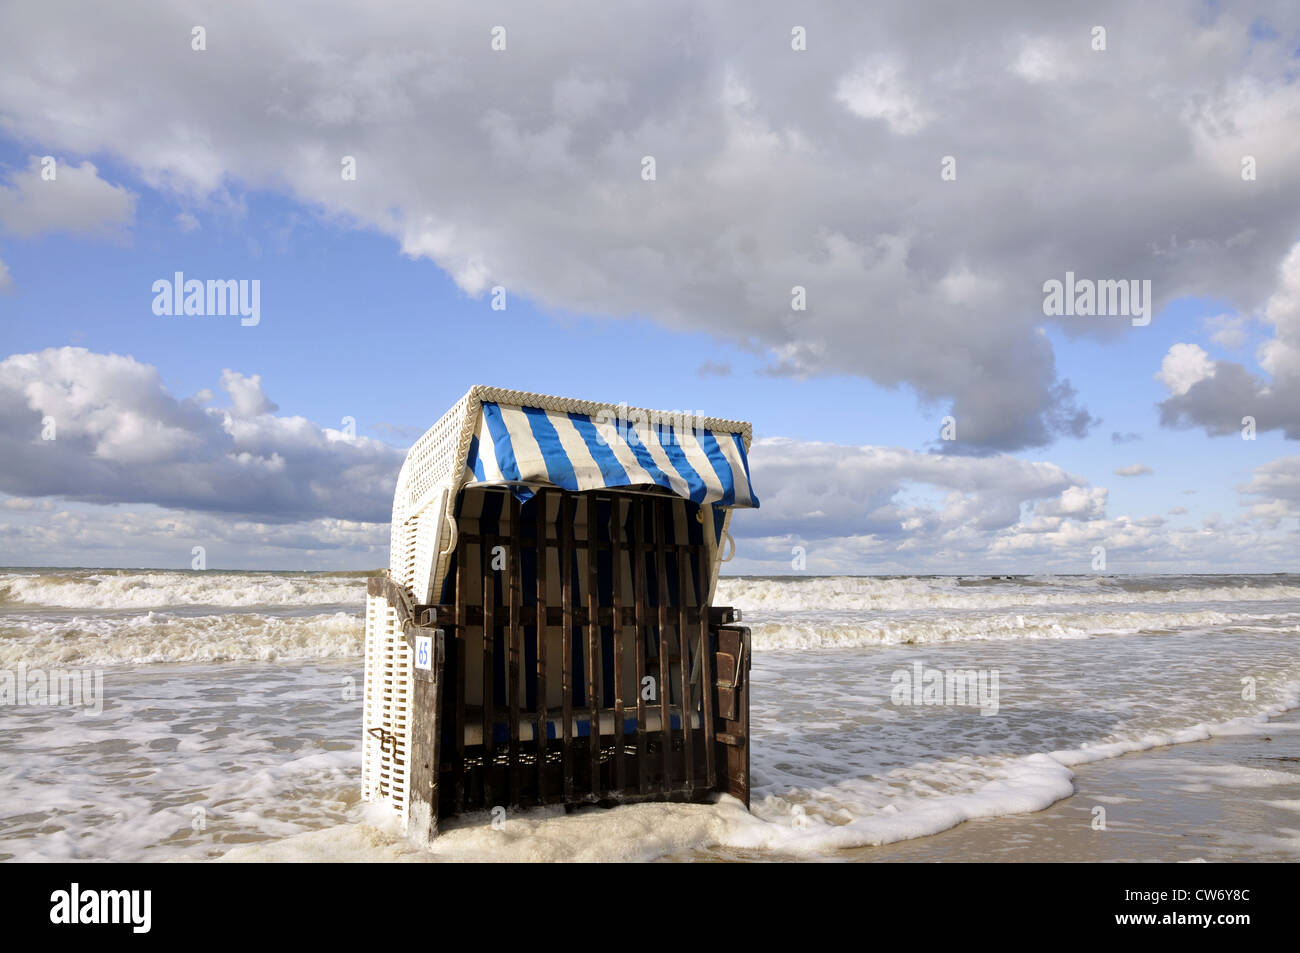 beach chair standing in the surf, Germany, Mecklenburg Vorpommern, Ostsee Stock Photo